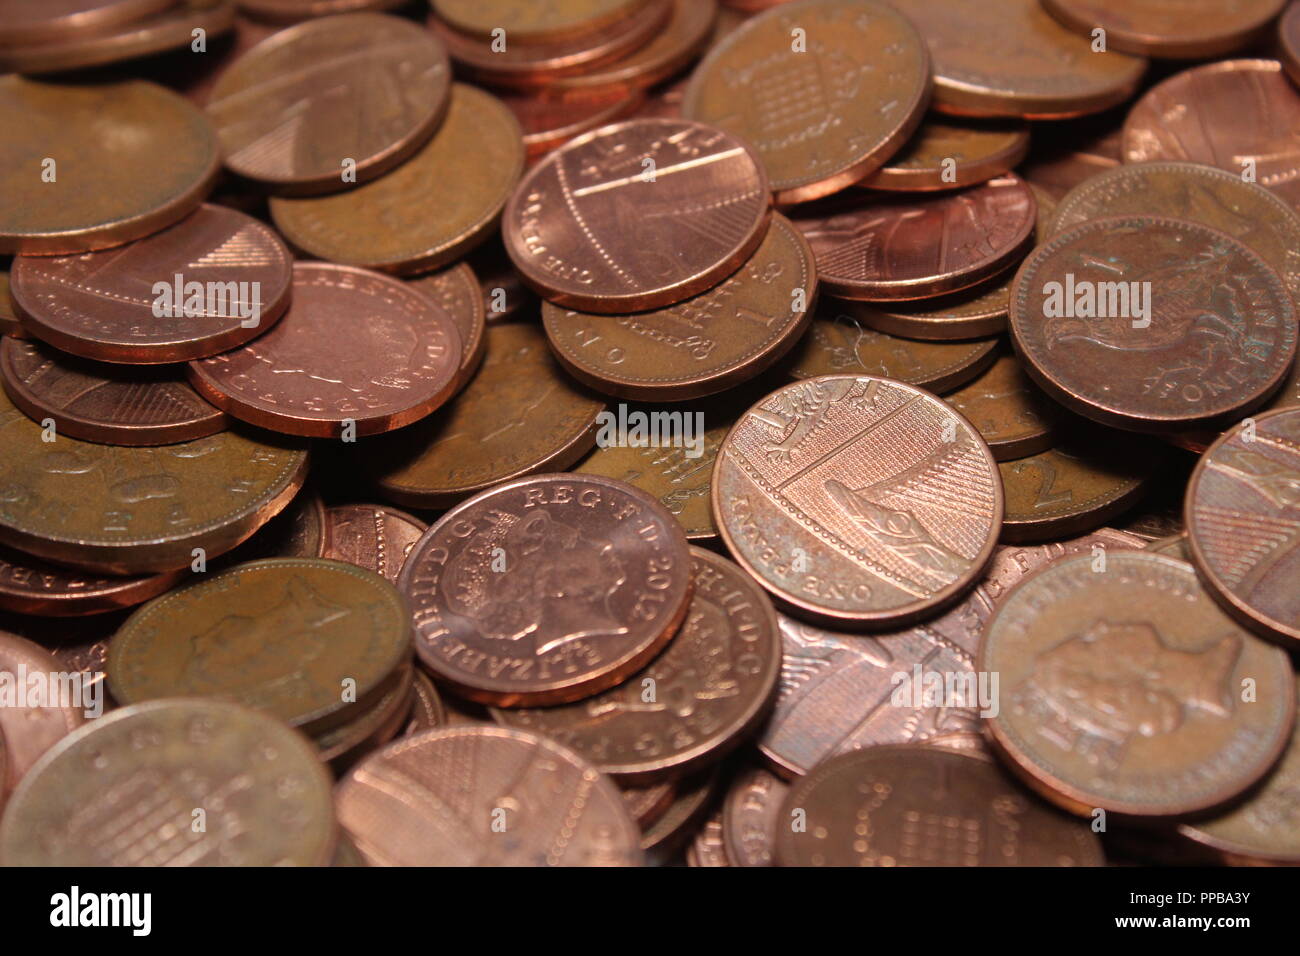 A pile of lose change British copper coins.A close up of 2p and 1p,UK coins. Stock Photo